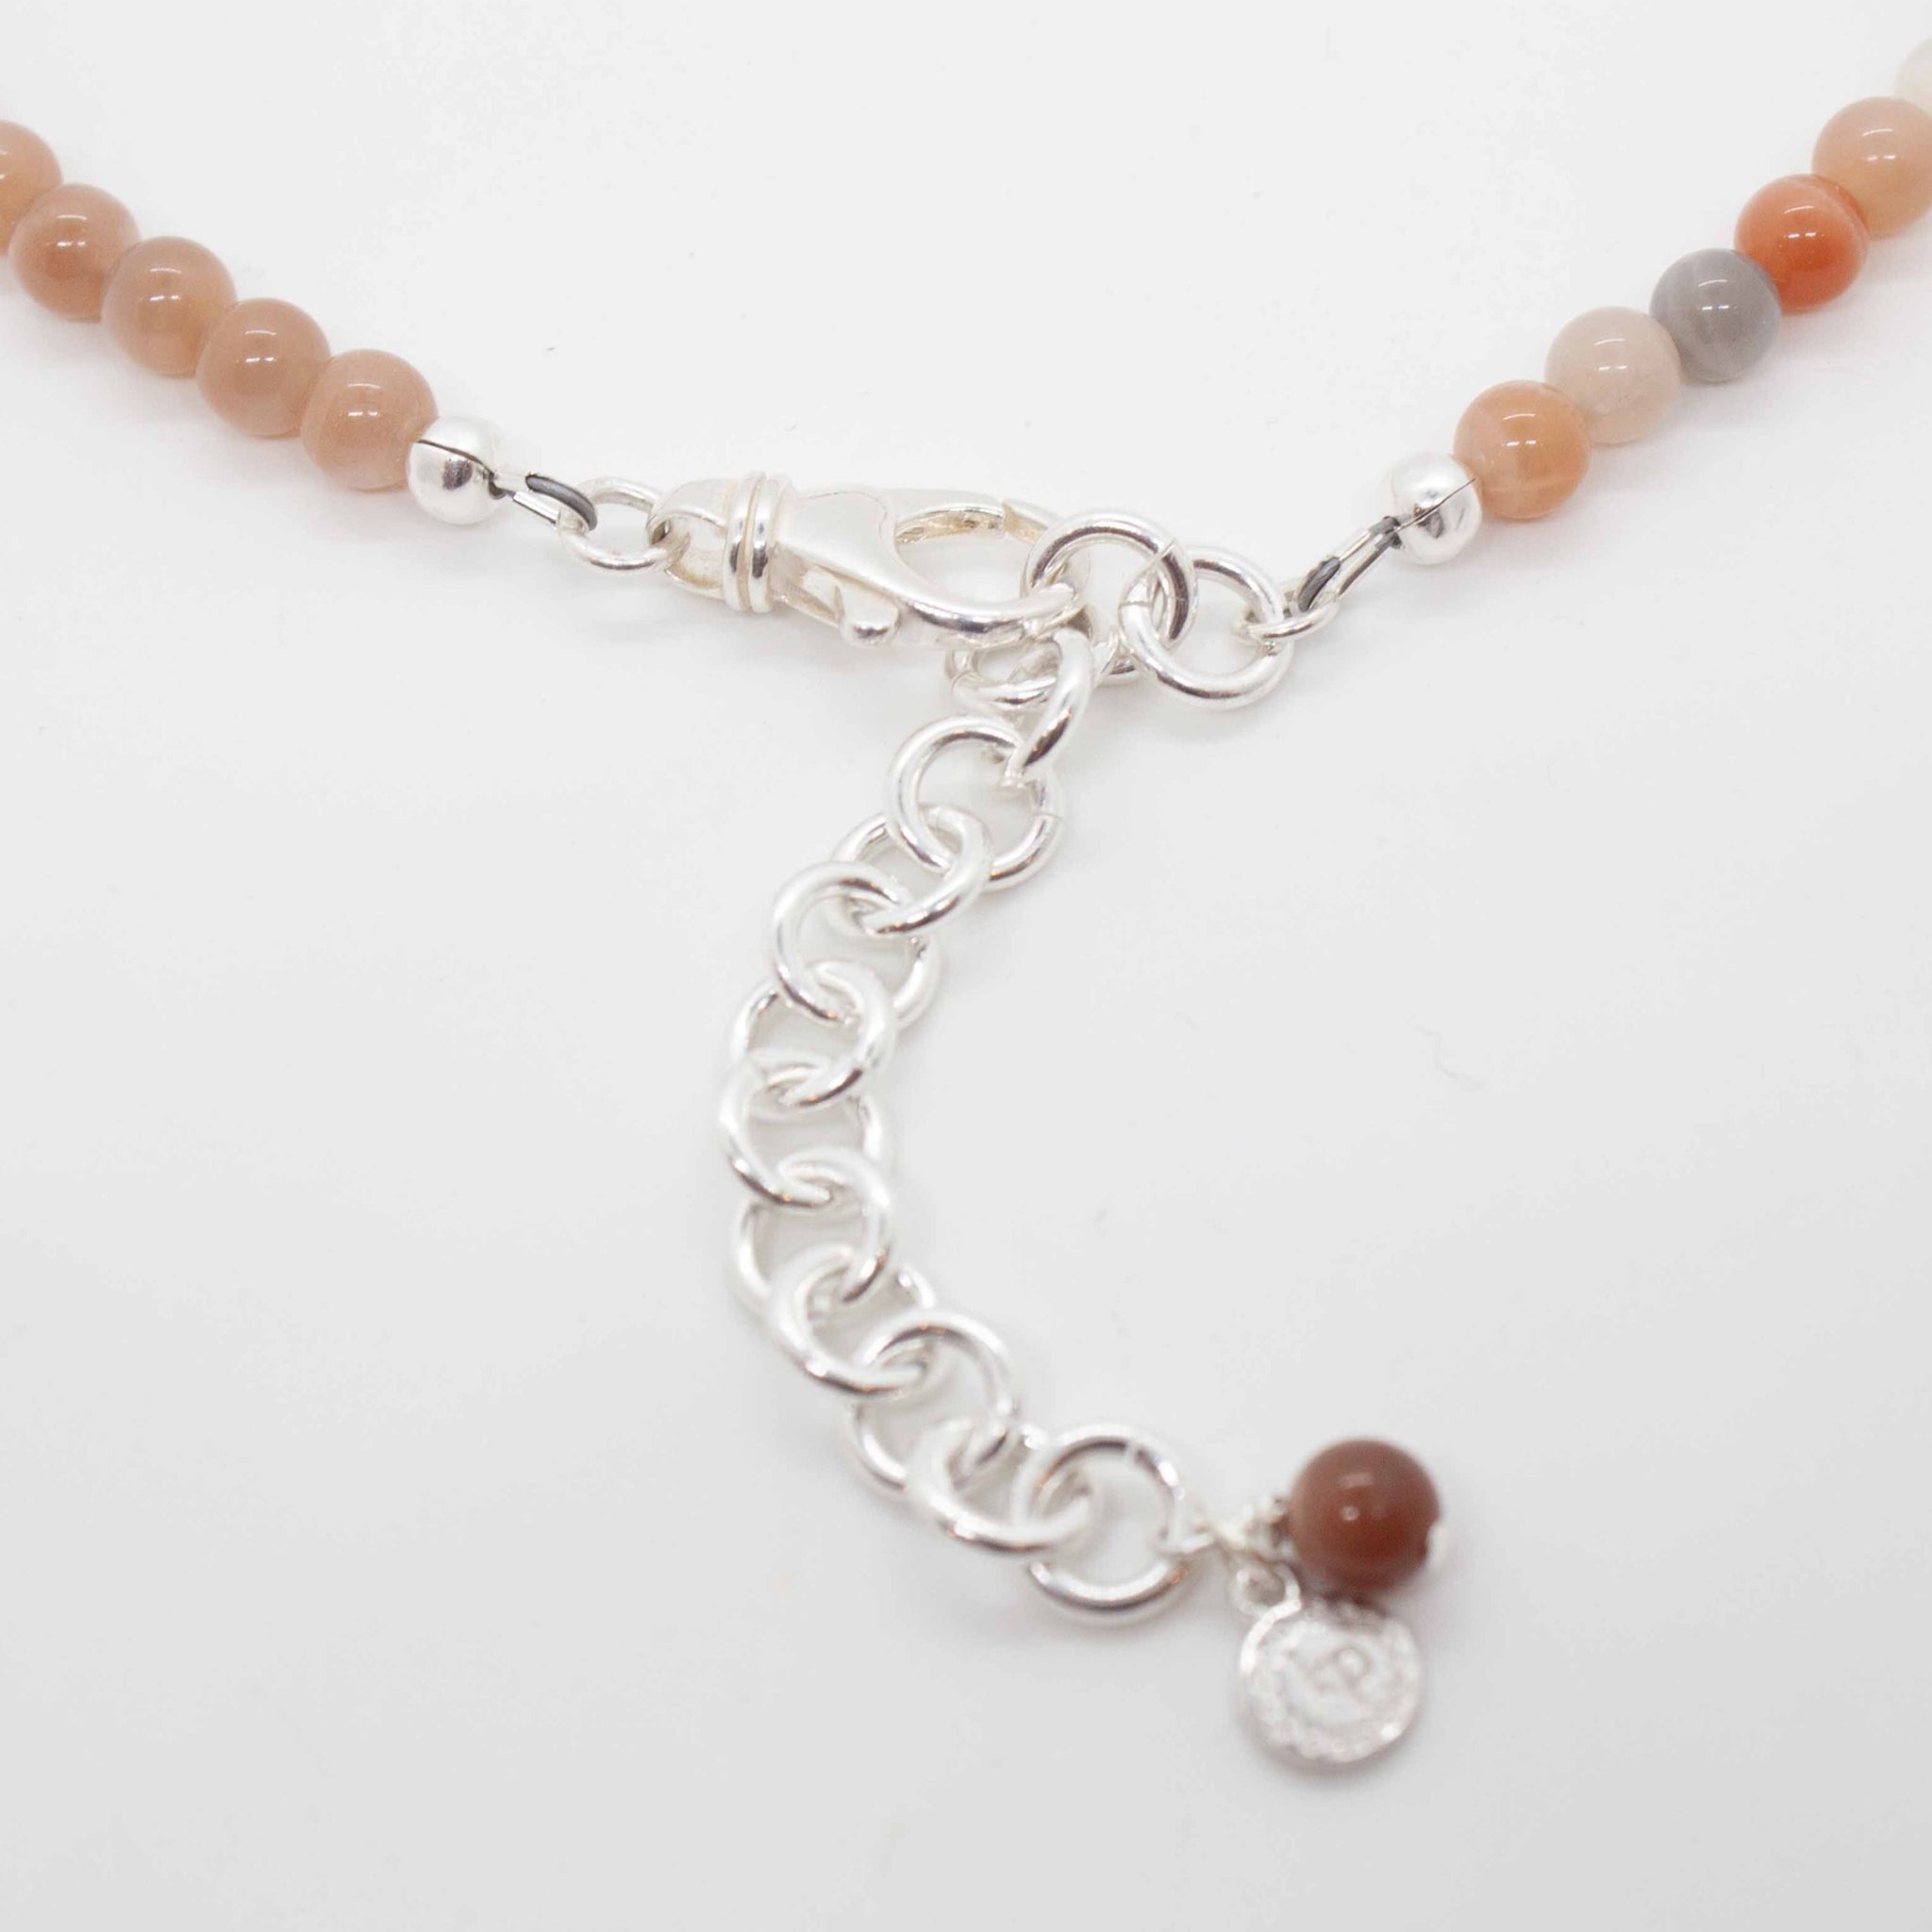 18 inch (adjustable to 20 inches) peach & mixed moonstone necklace with sterling silver hamsa charm.